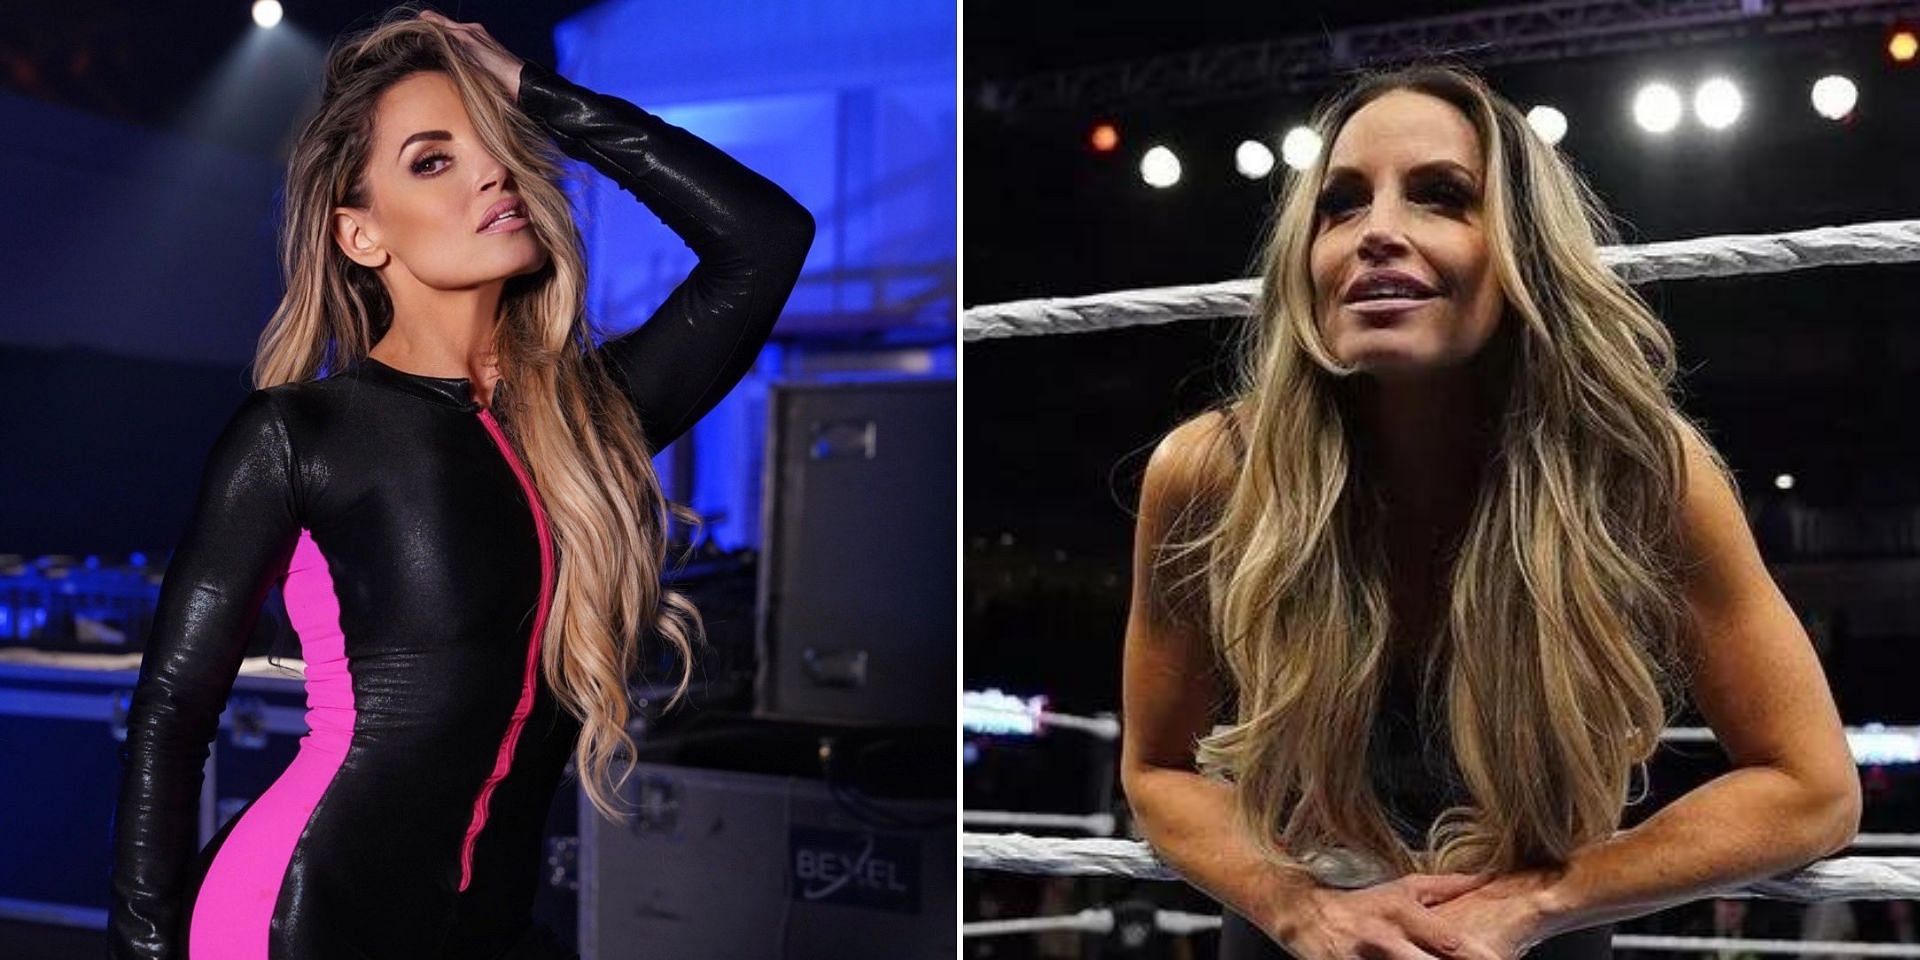 Trish Stratus has been working with this WWE star